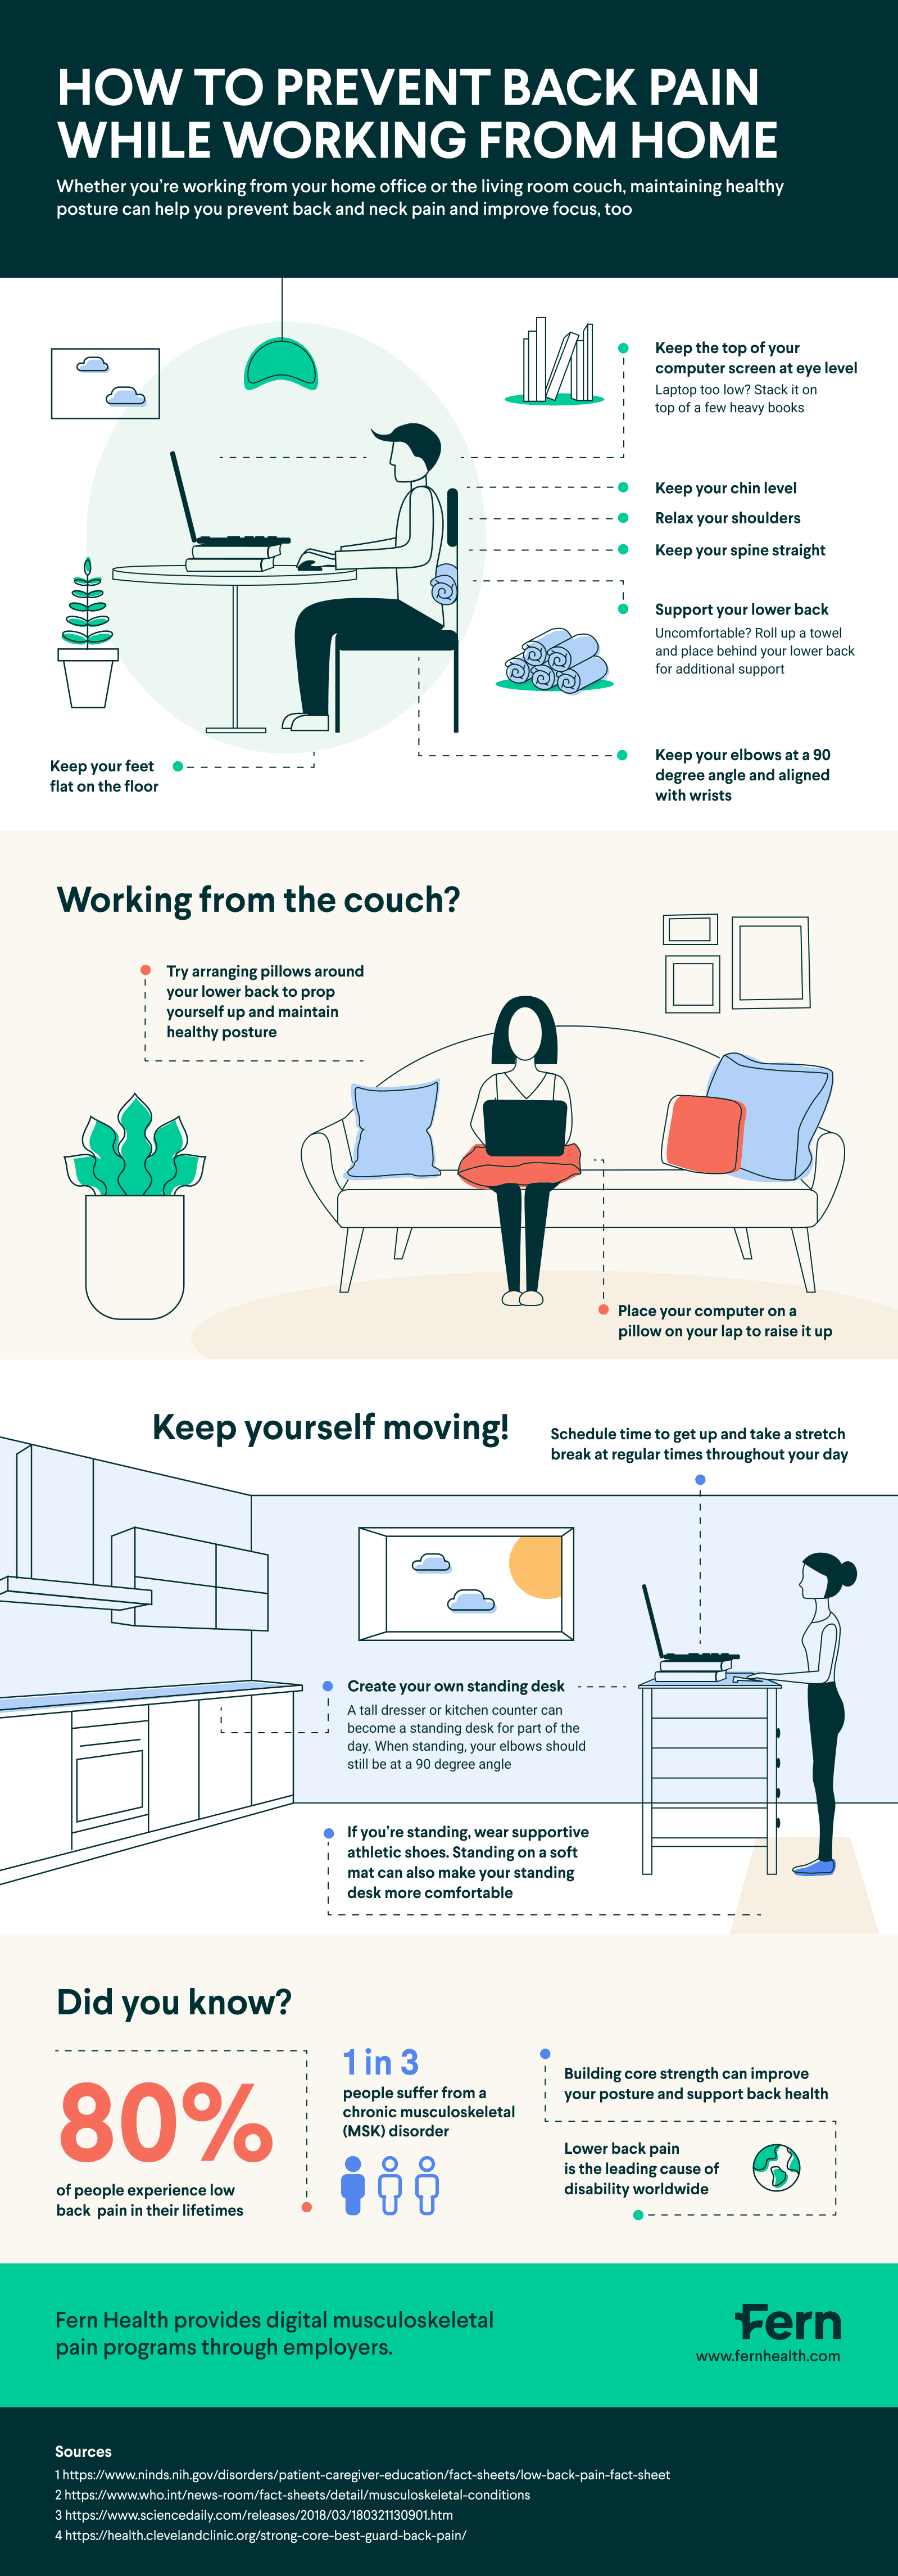 How-to-prevent-back-pain-at-home-infographic.png